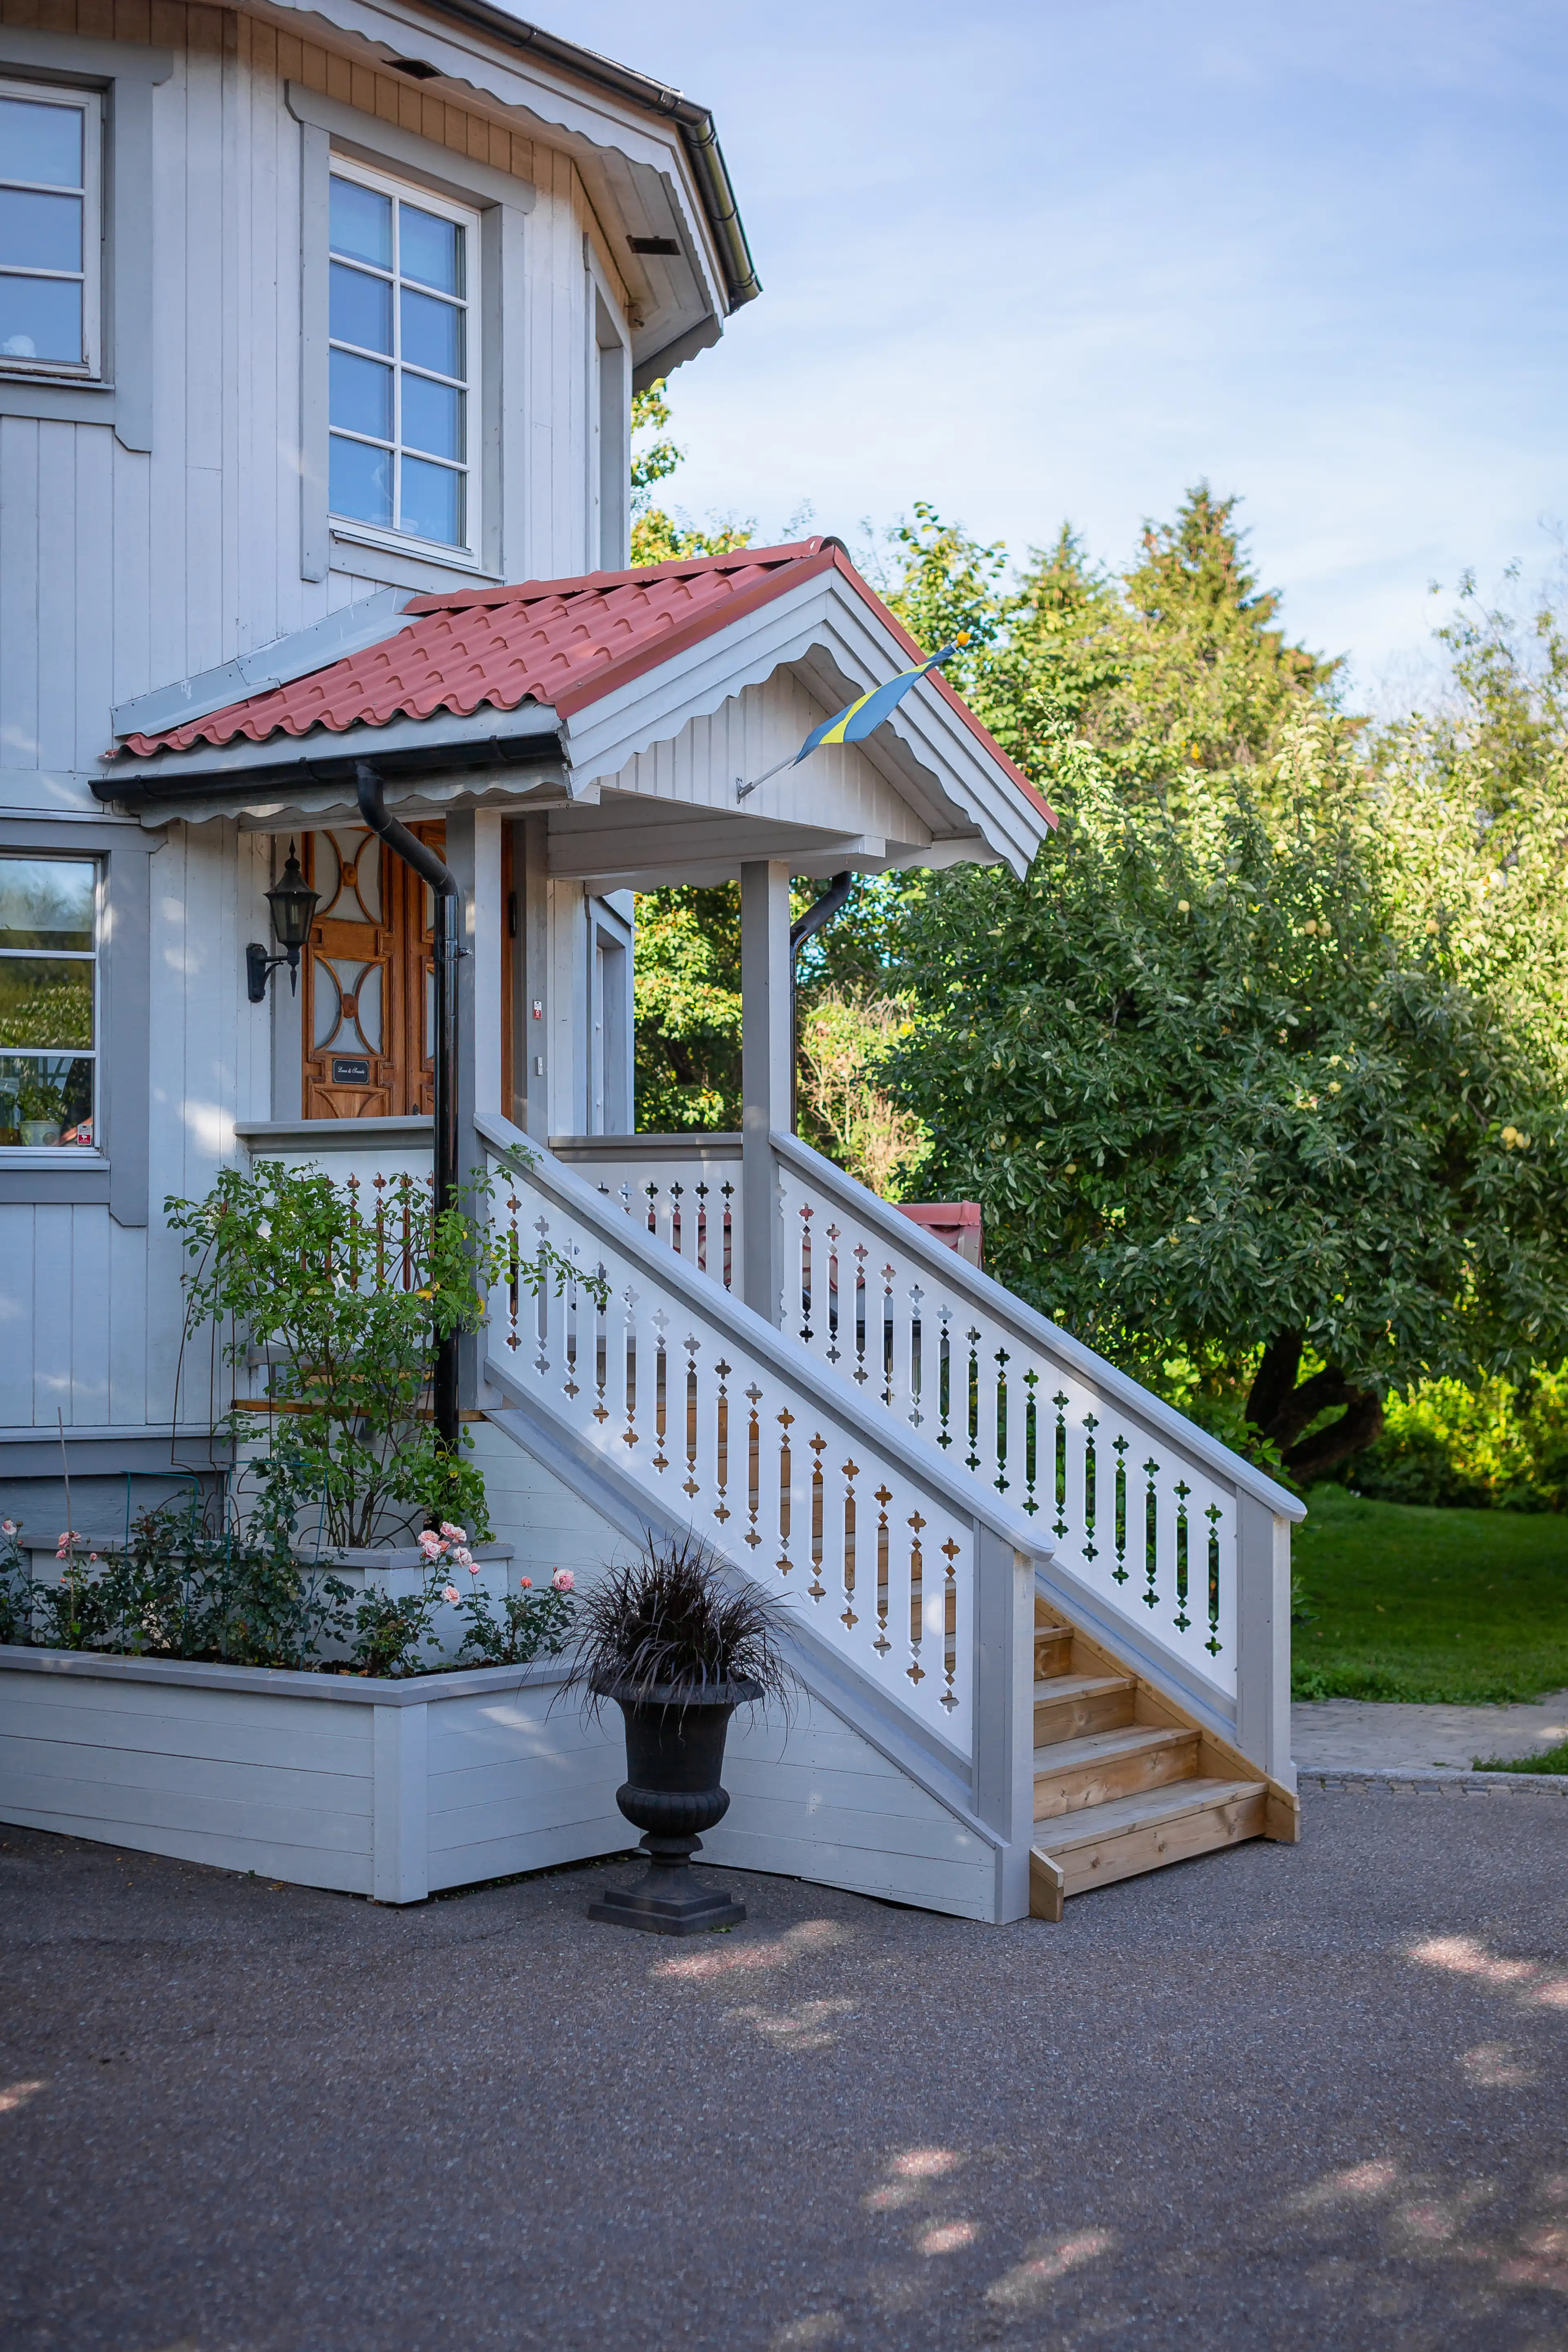 An elegant staircase leading to a porch with white-painted railings in turn-of-the-century and 19th-century style - vintage with a touch of rustic charm